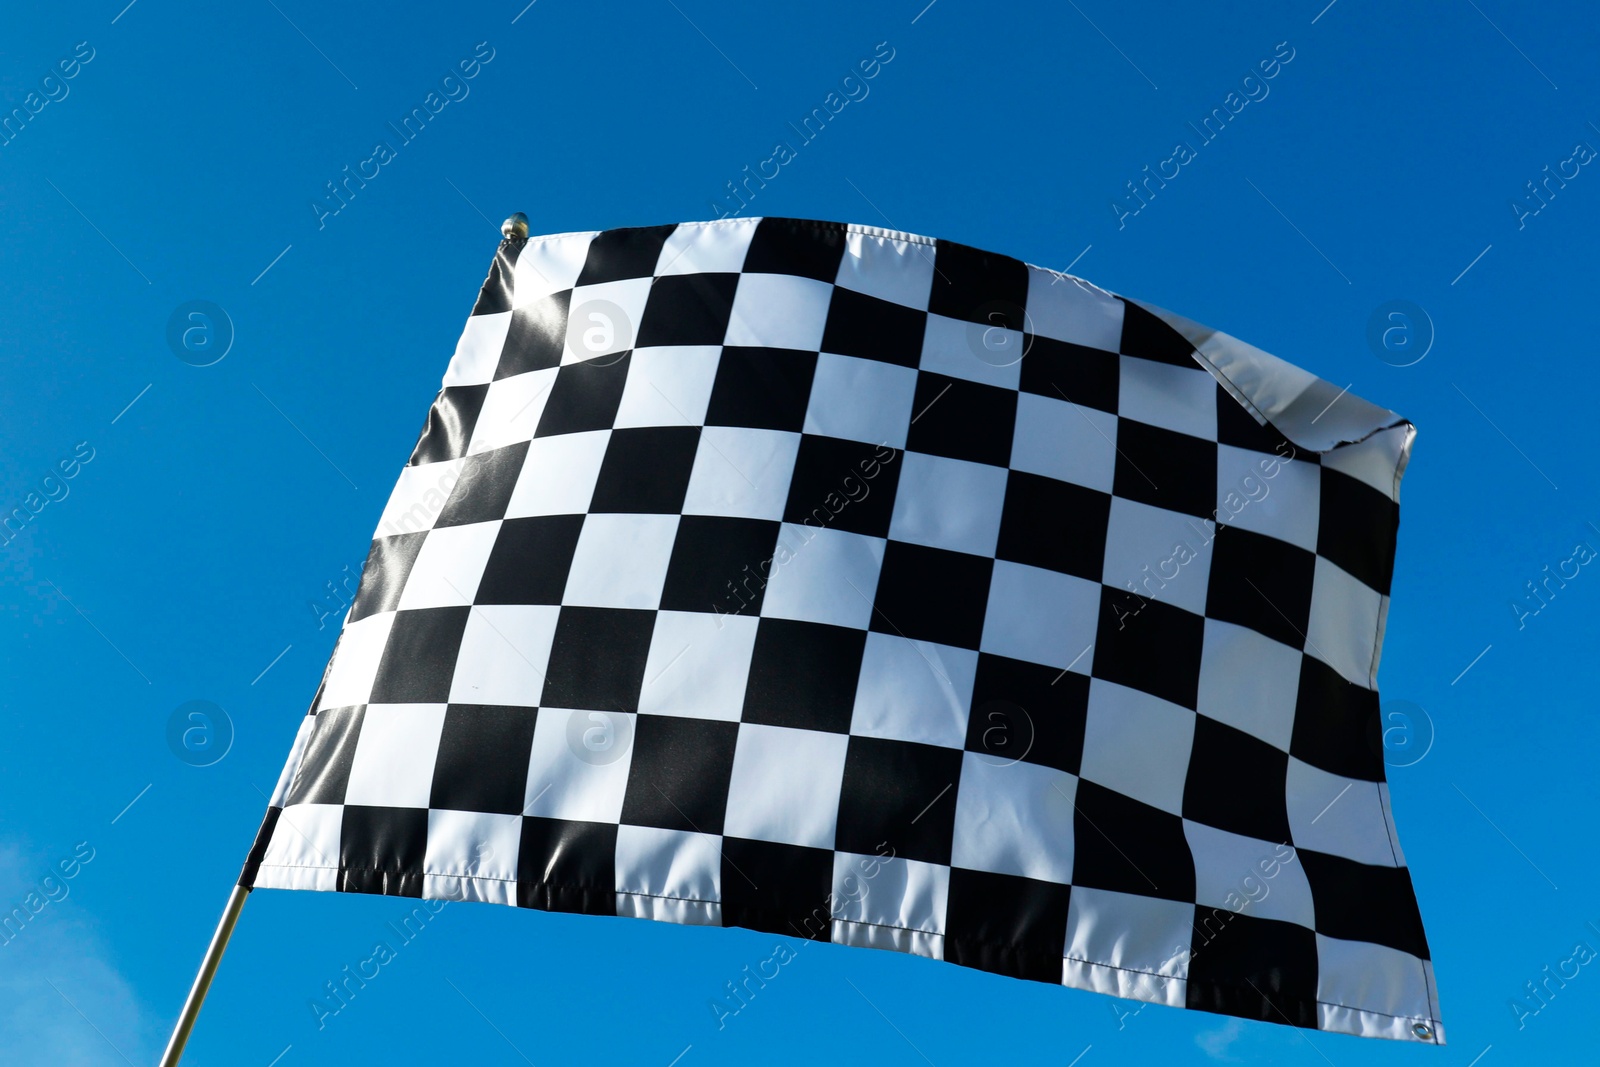 Photo of Checkered flag against blue sky outdoors, low angle view. Space for text